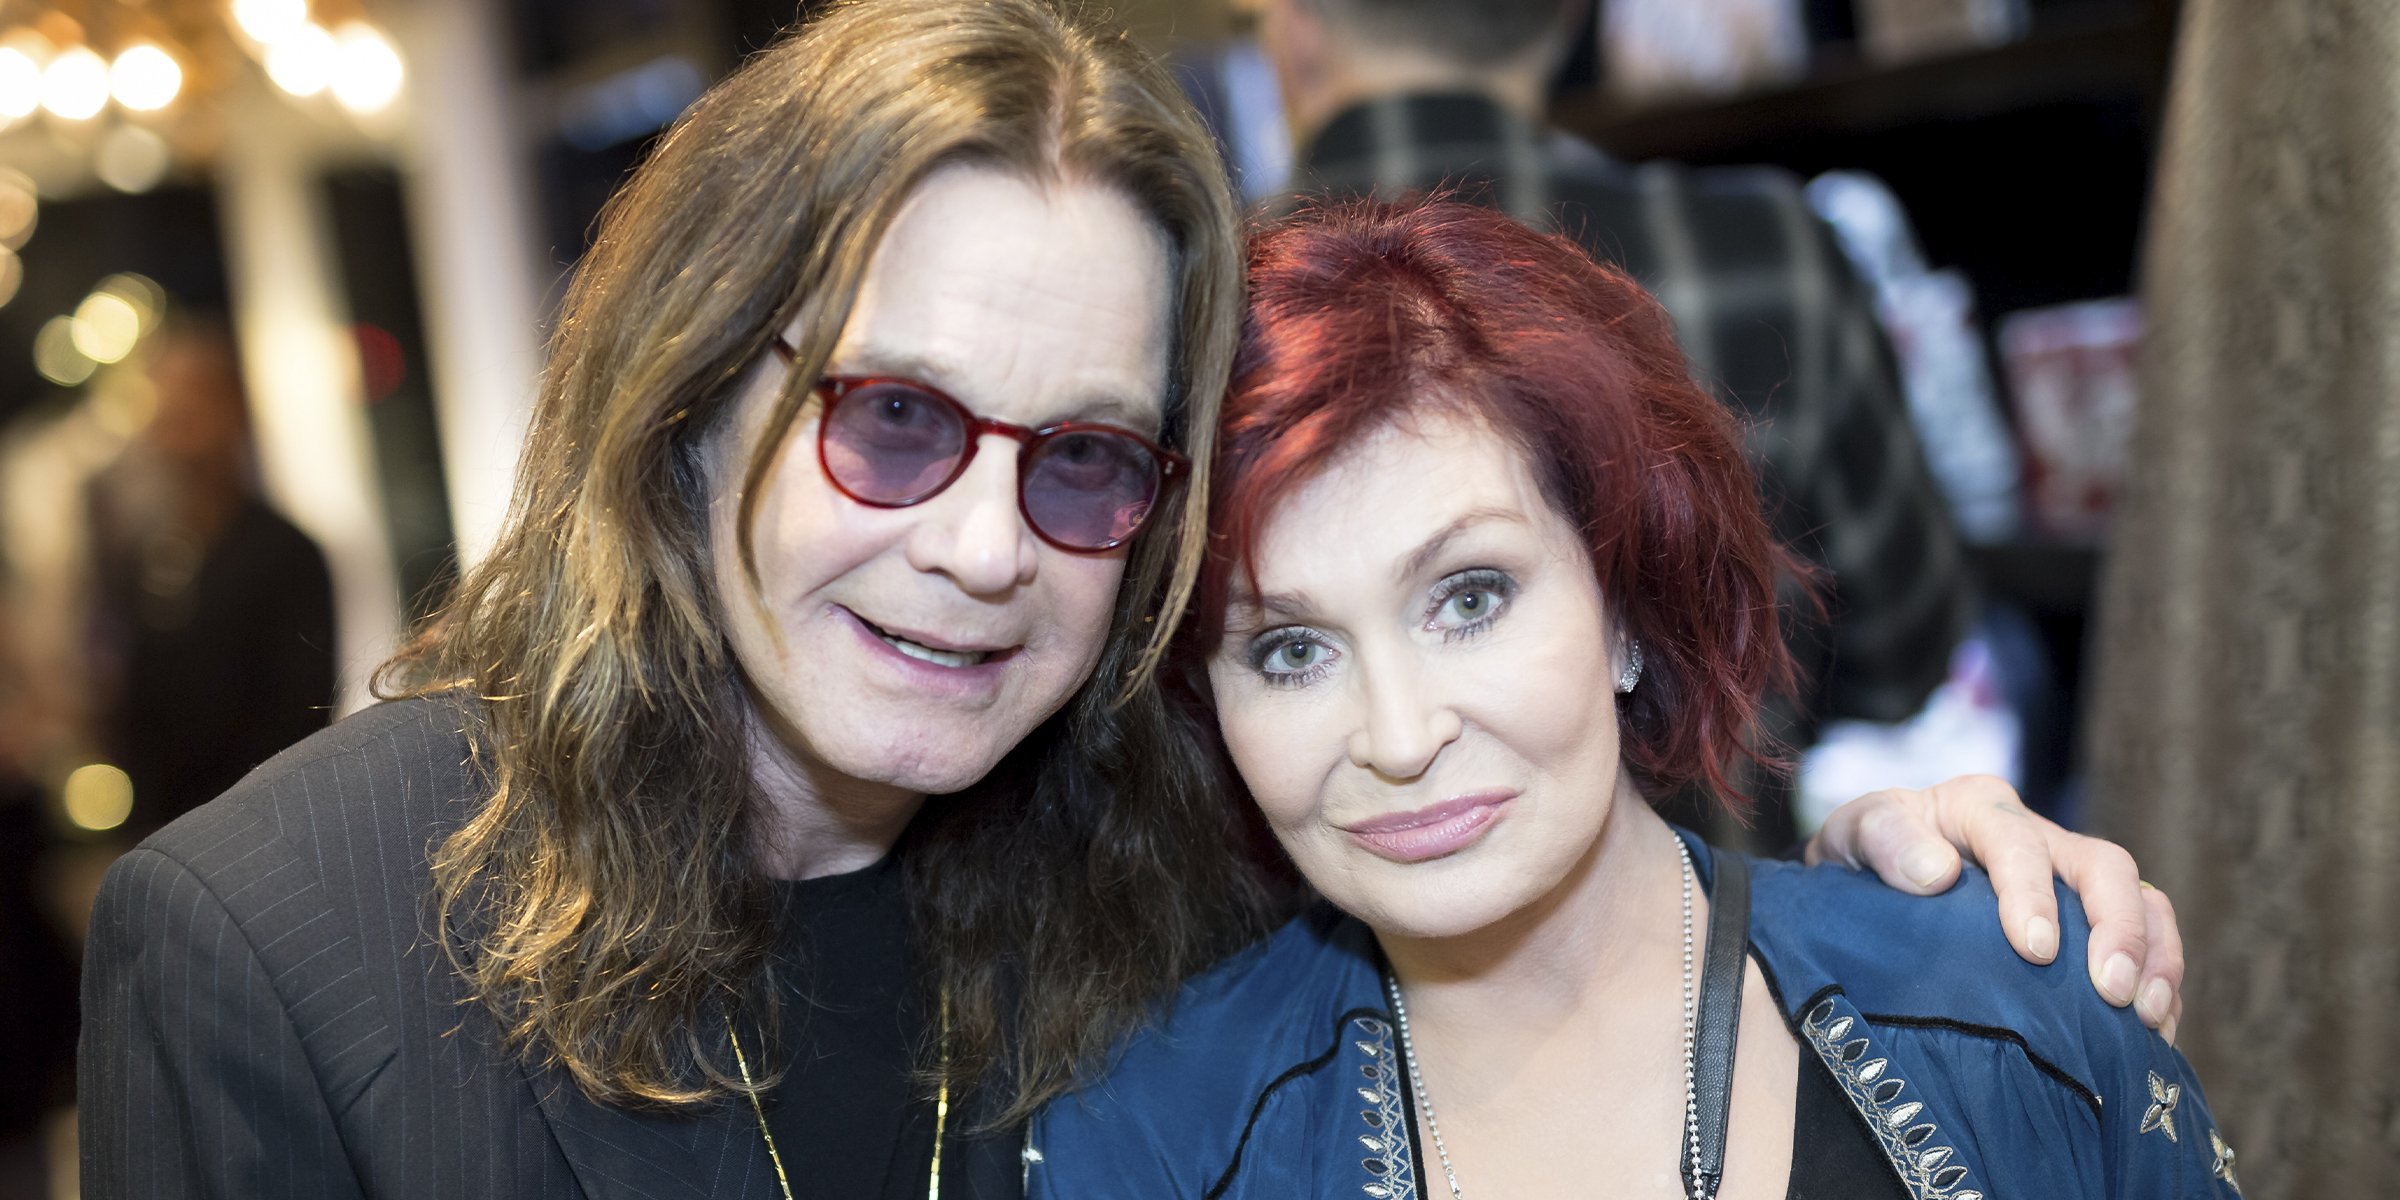 Ozzy and Sharon Osbourne | Source: Getty Images